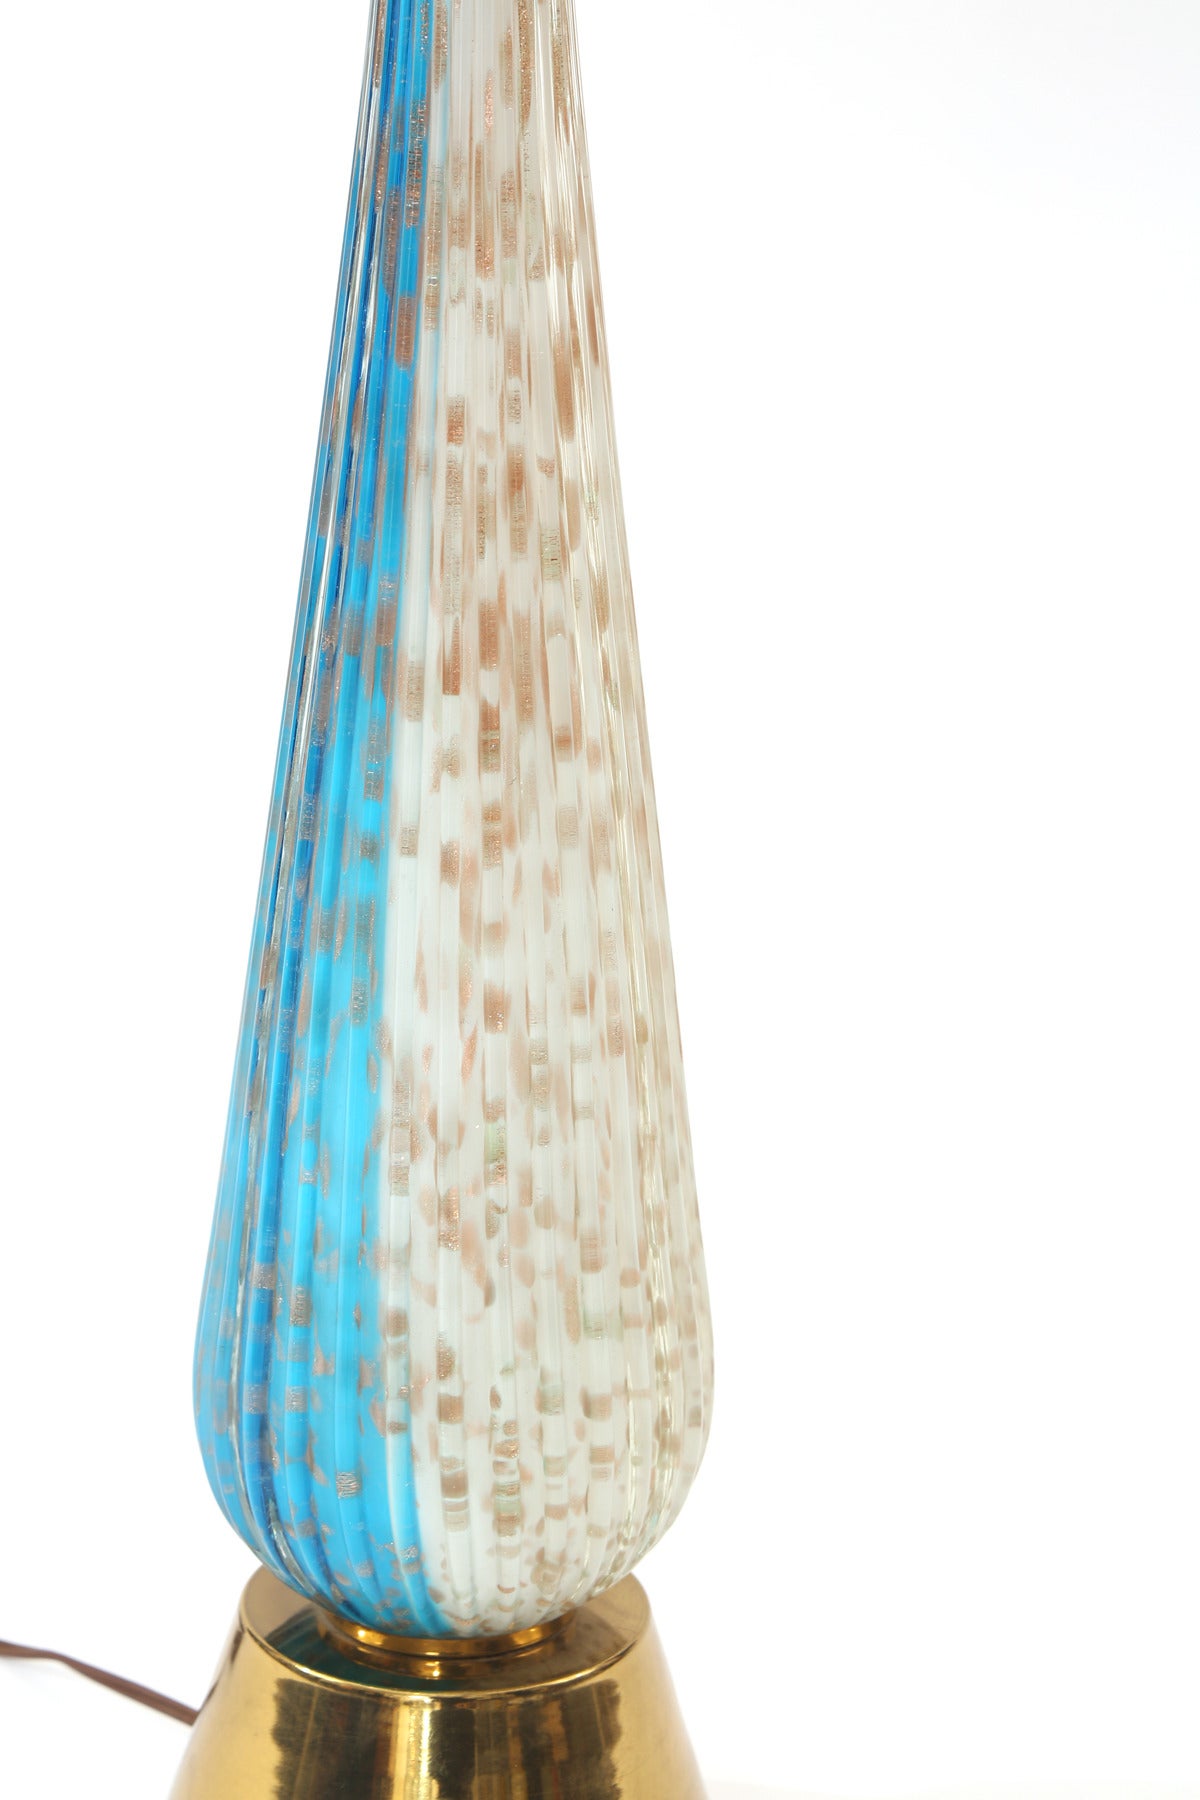 Barovier e Toso handblown Murano glass and brass large-scale table lamp, circa late 1950s. This stunning example has turquoise and clear glass with gold flecks and beautiful fluted form. Price listed is without the shade. Dimension to top of socket